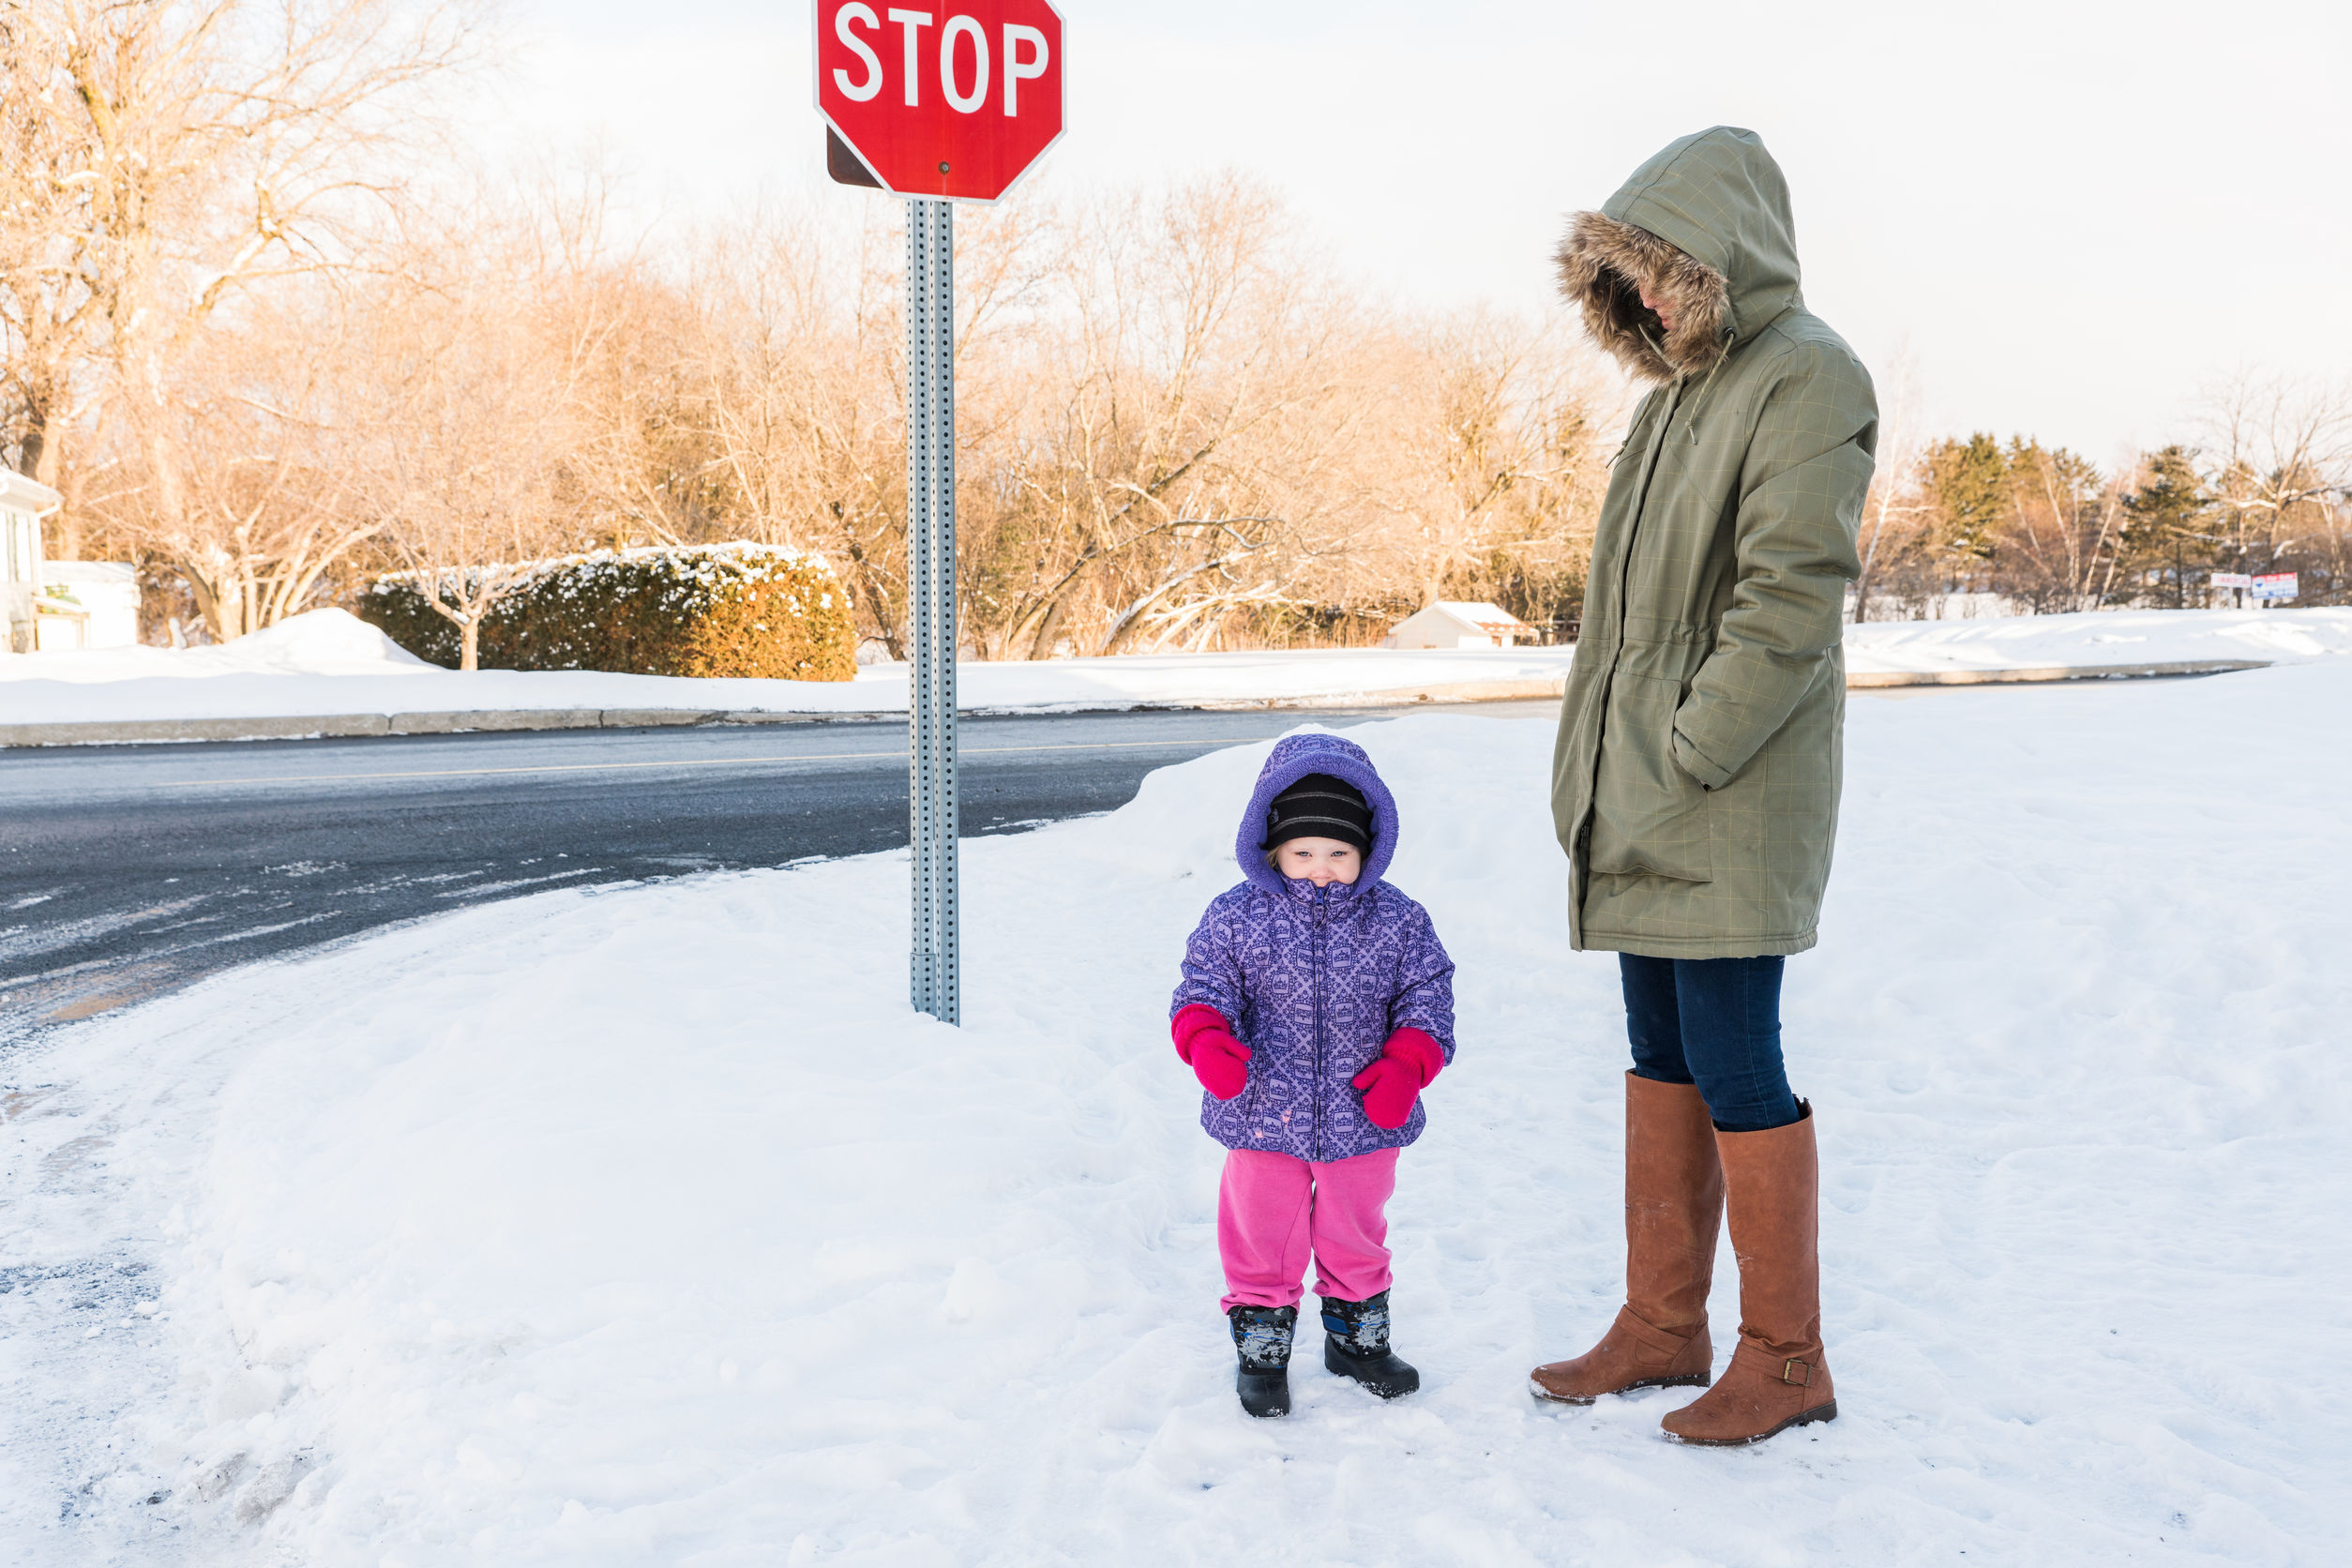 Child and parent in snow standing by a stop sign